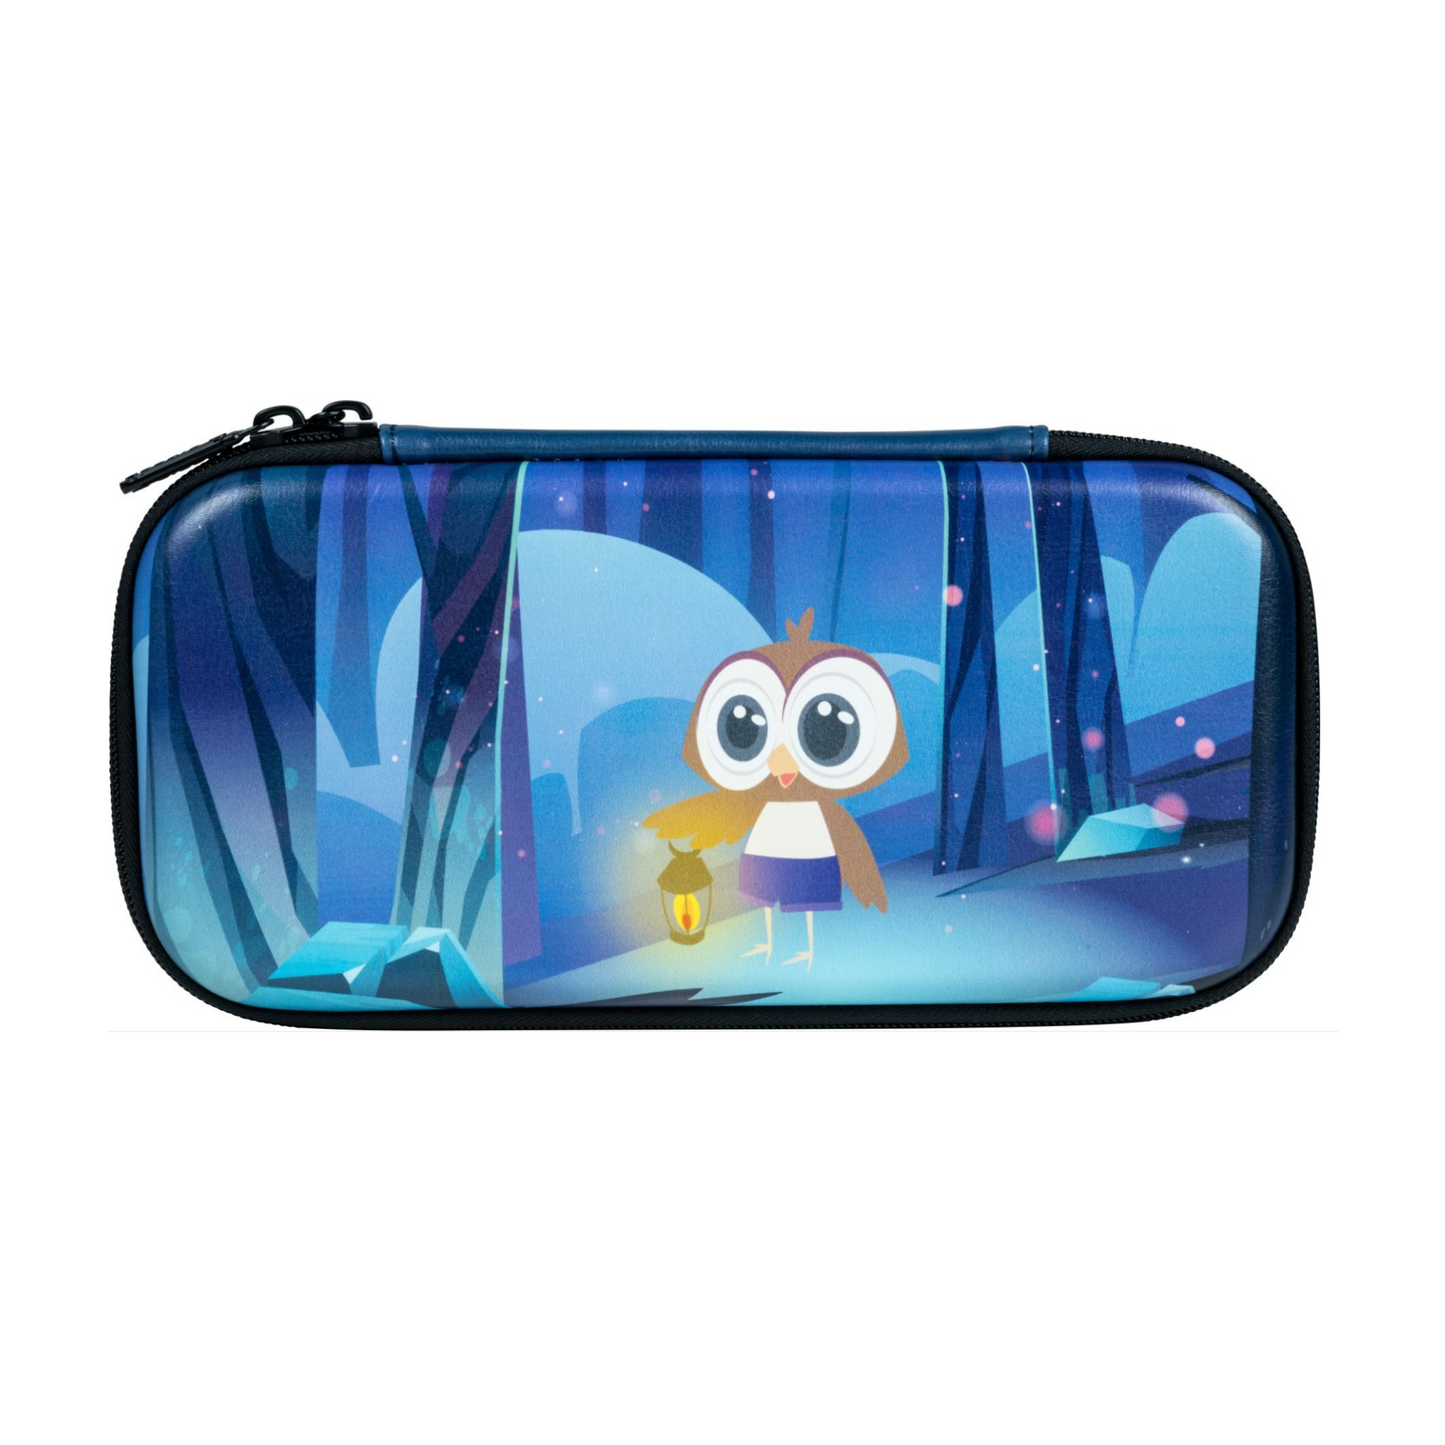 Owl style Protection case for Nintendo switch systems.